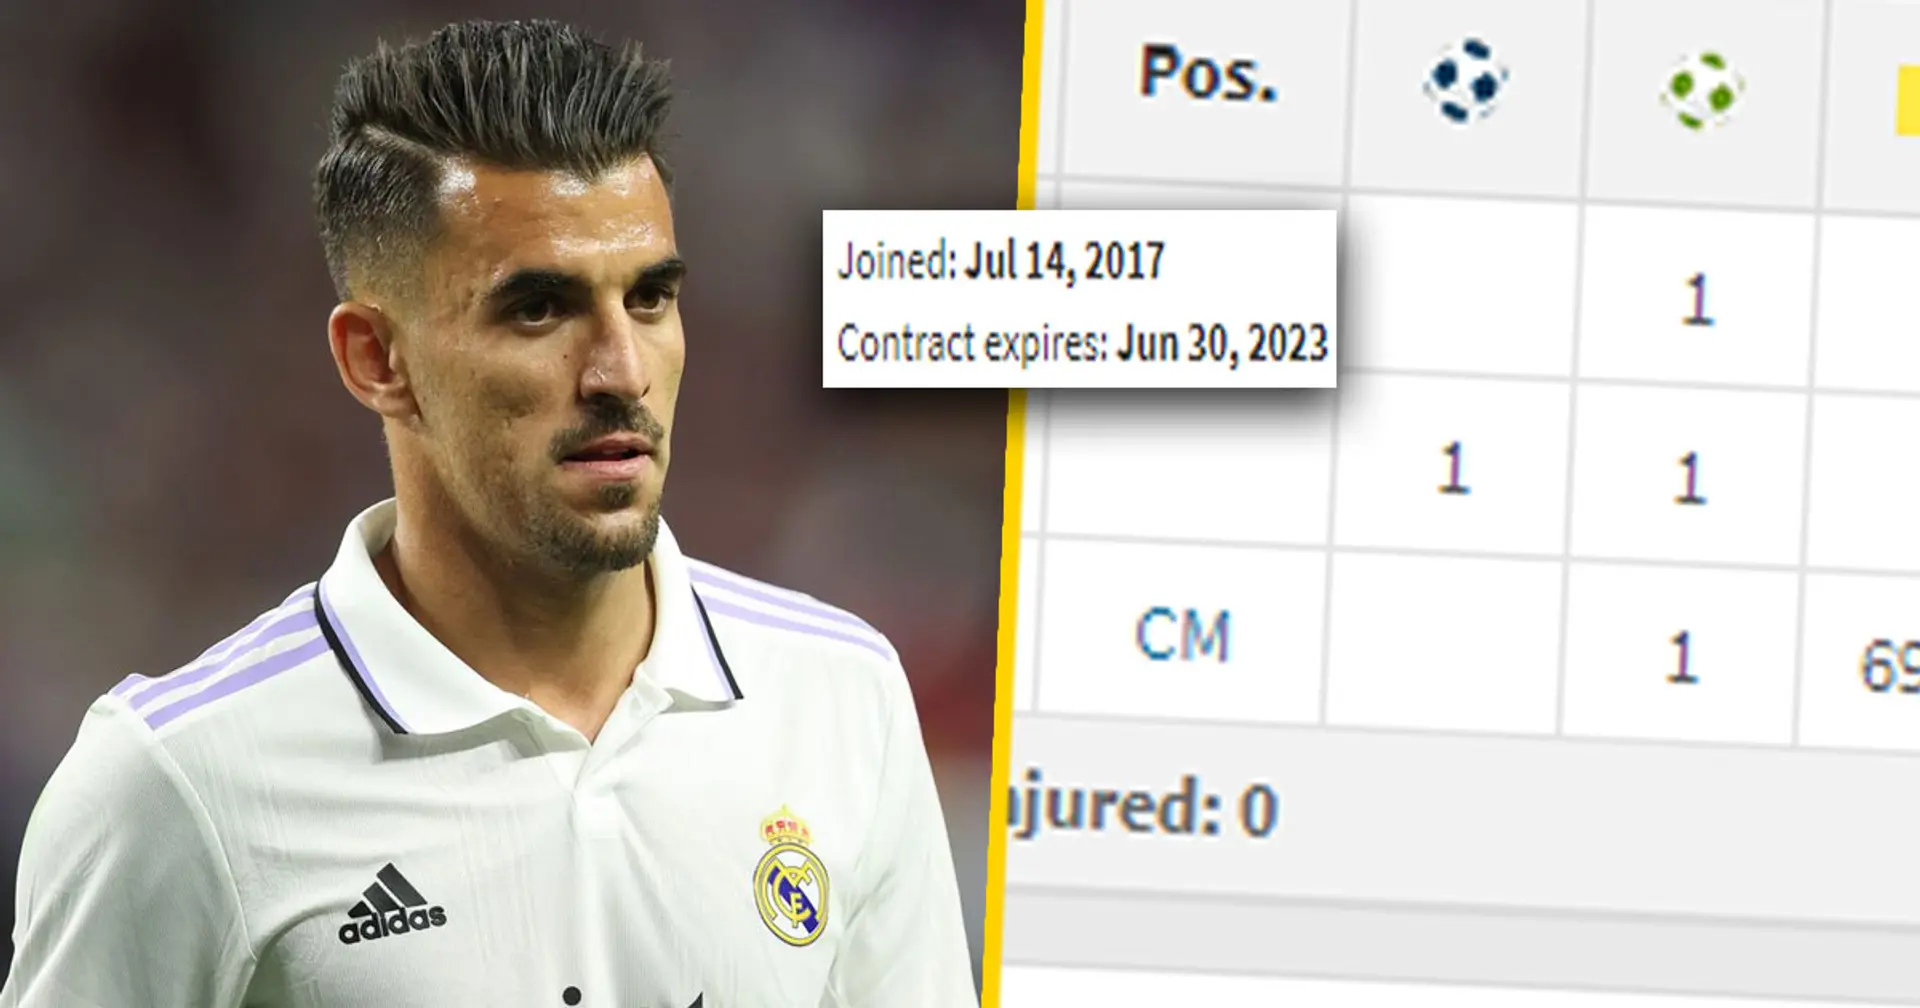 Ceballos rejecting offers from clubs to continue at Bernabeu, Real Madrid's stance revealed (reliability: 4 stars)